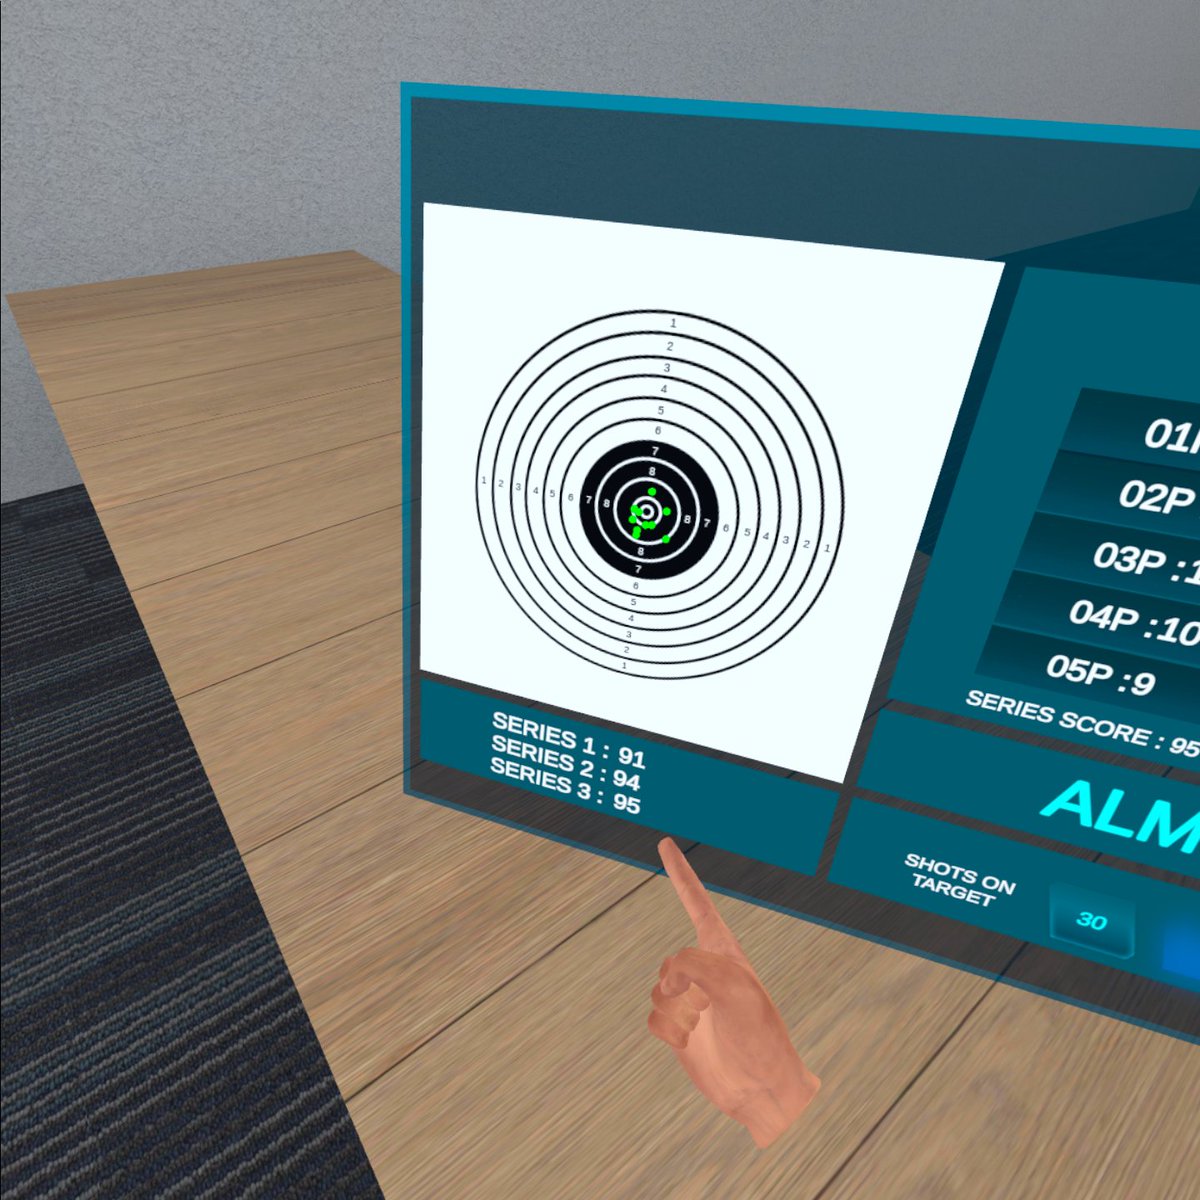 #screenshotsaturday time! #indiedev

You can check where you hit with the scoreboard beside you in Pro Shooter VR. Hit the bull's eye!

Available on Quest App Lab!
oculus.com/experiences/qu…

#gamedev #gamedevelopment #shootingsport #unity